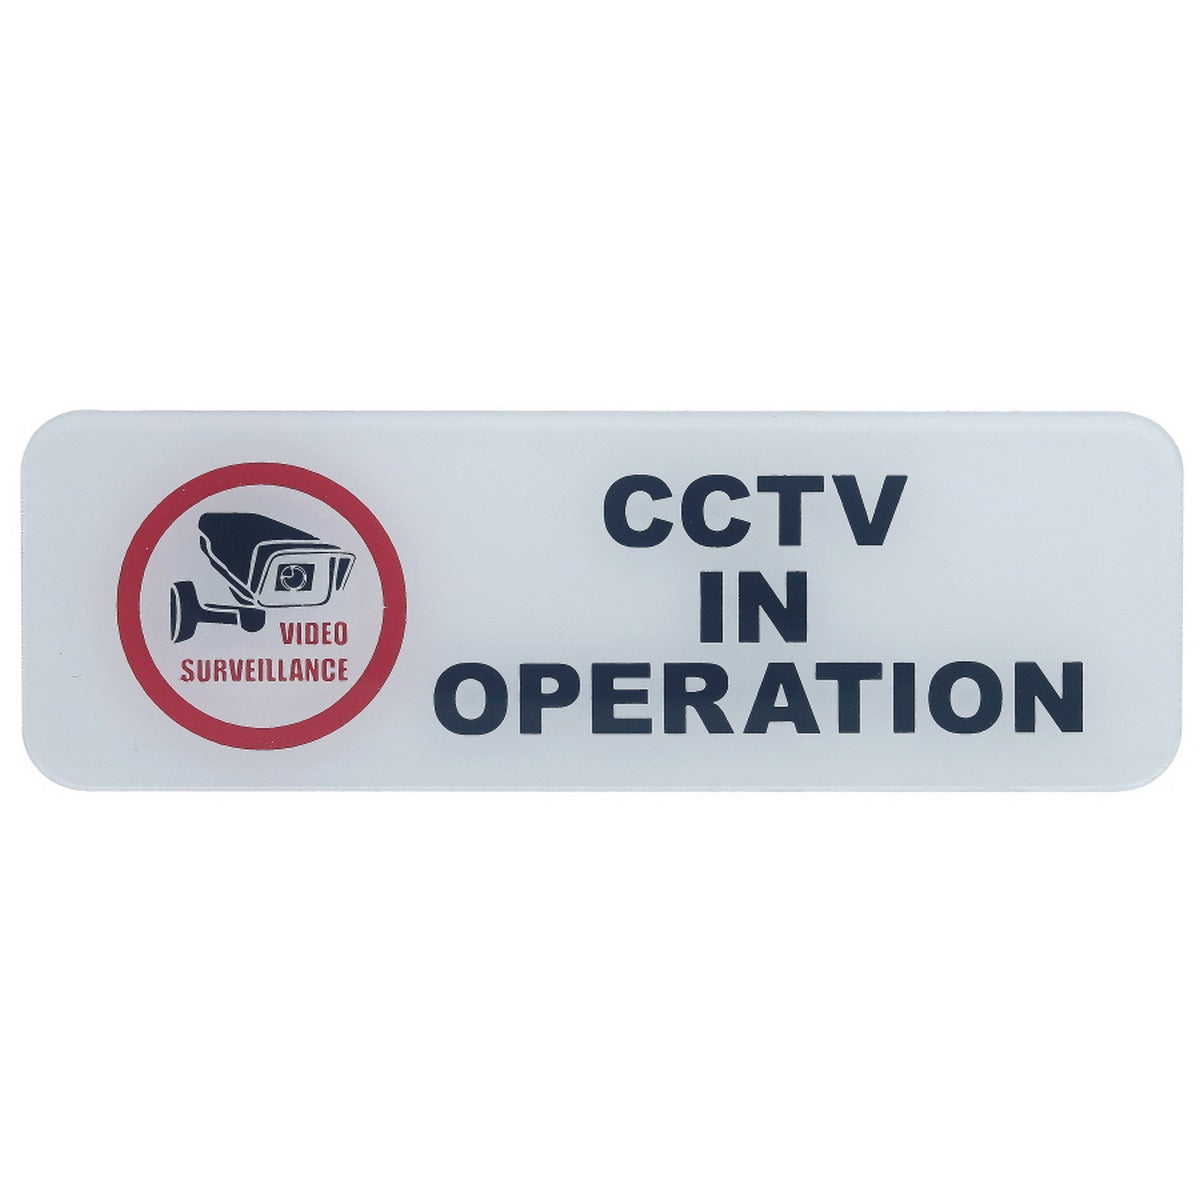 jags-mumbai Office Display Stands Sticker White CCTV In Operation